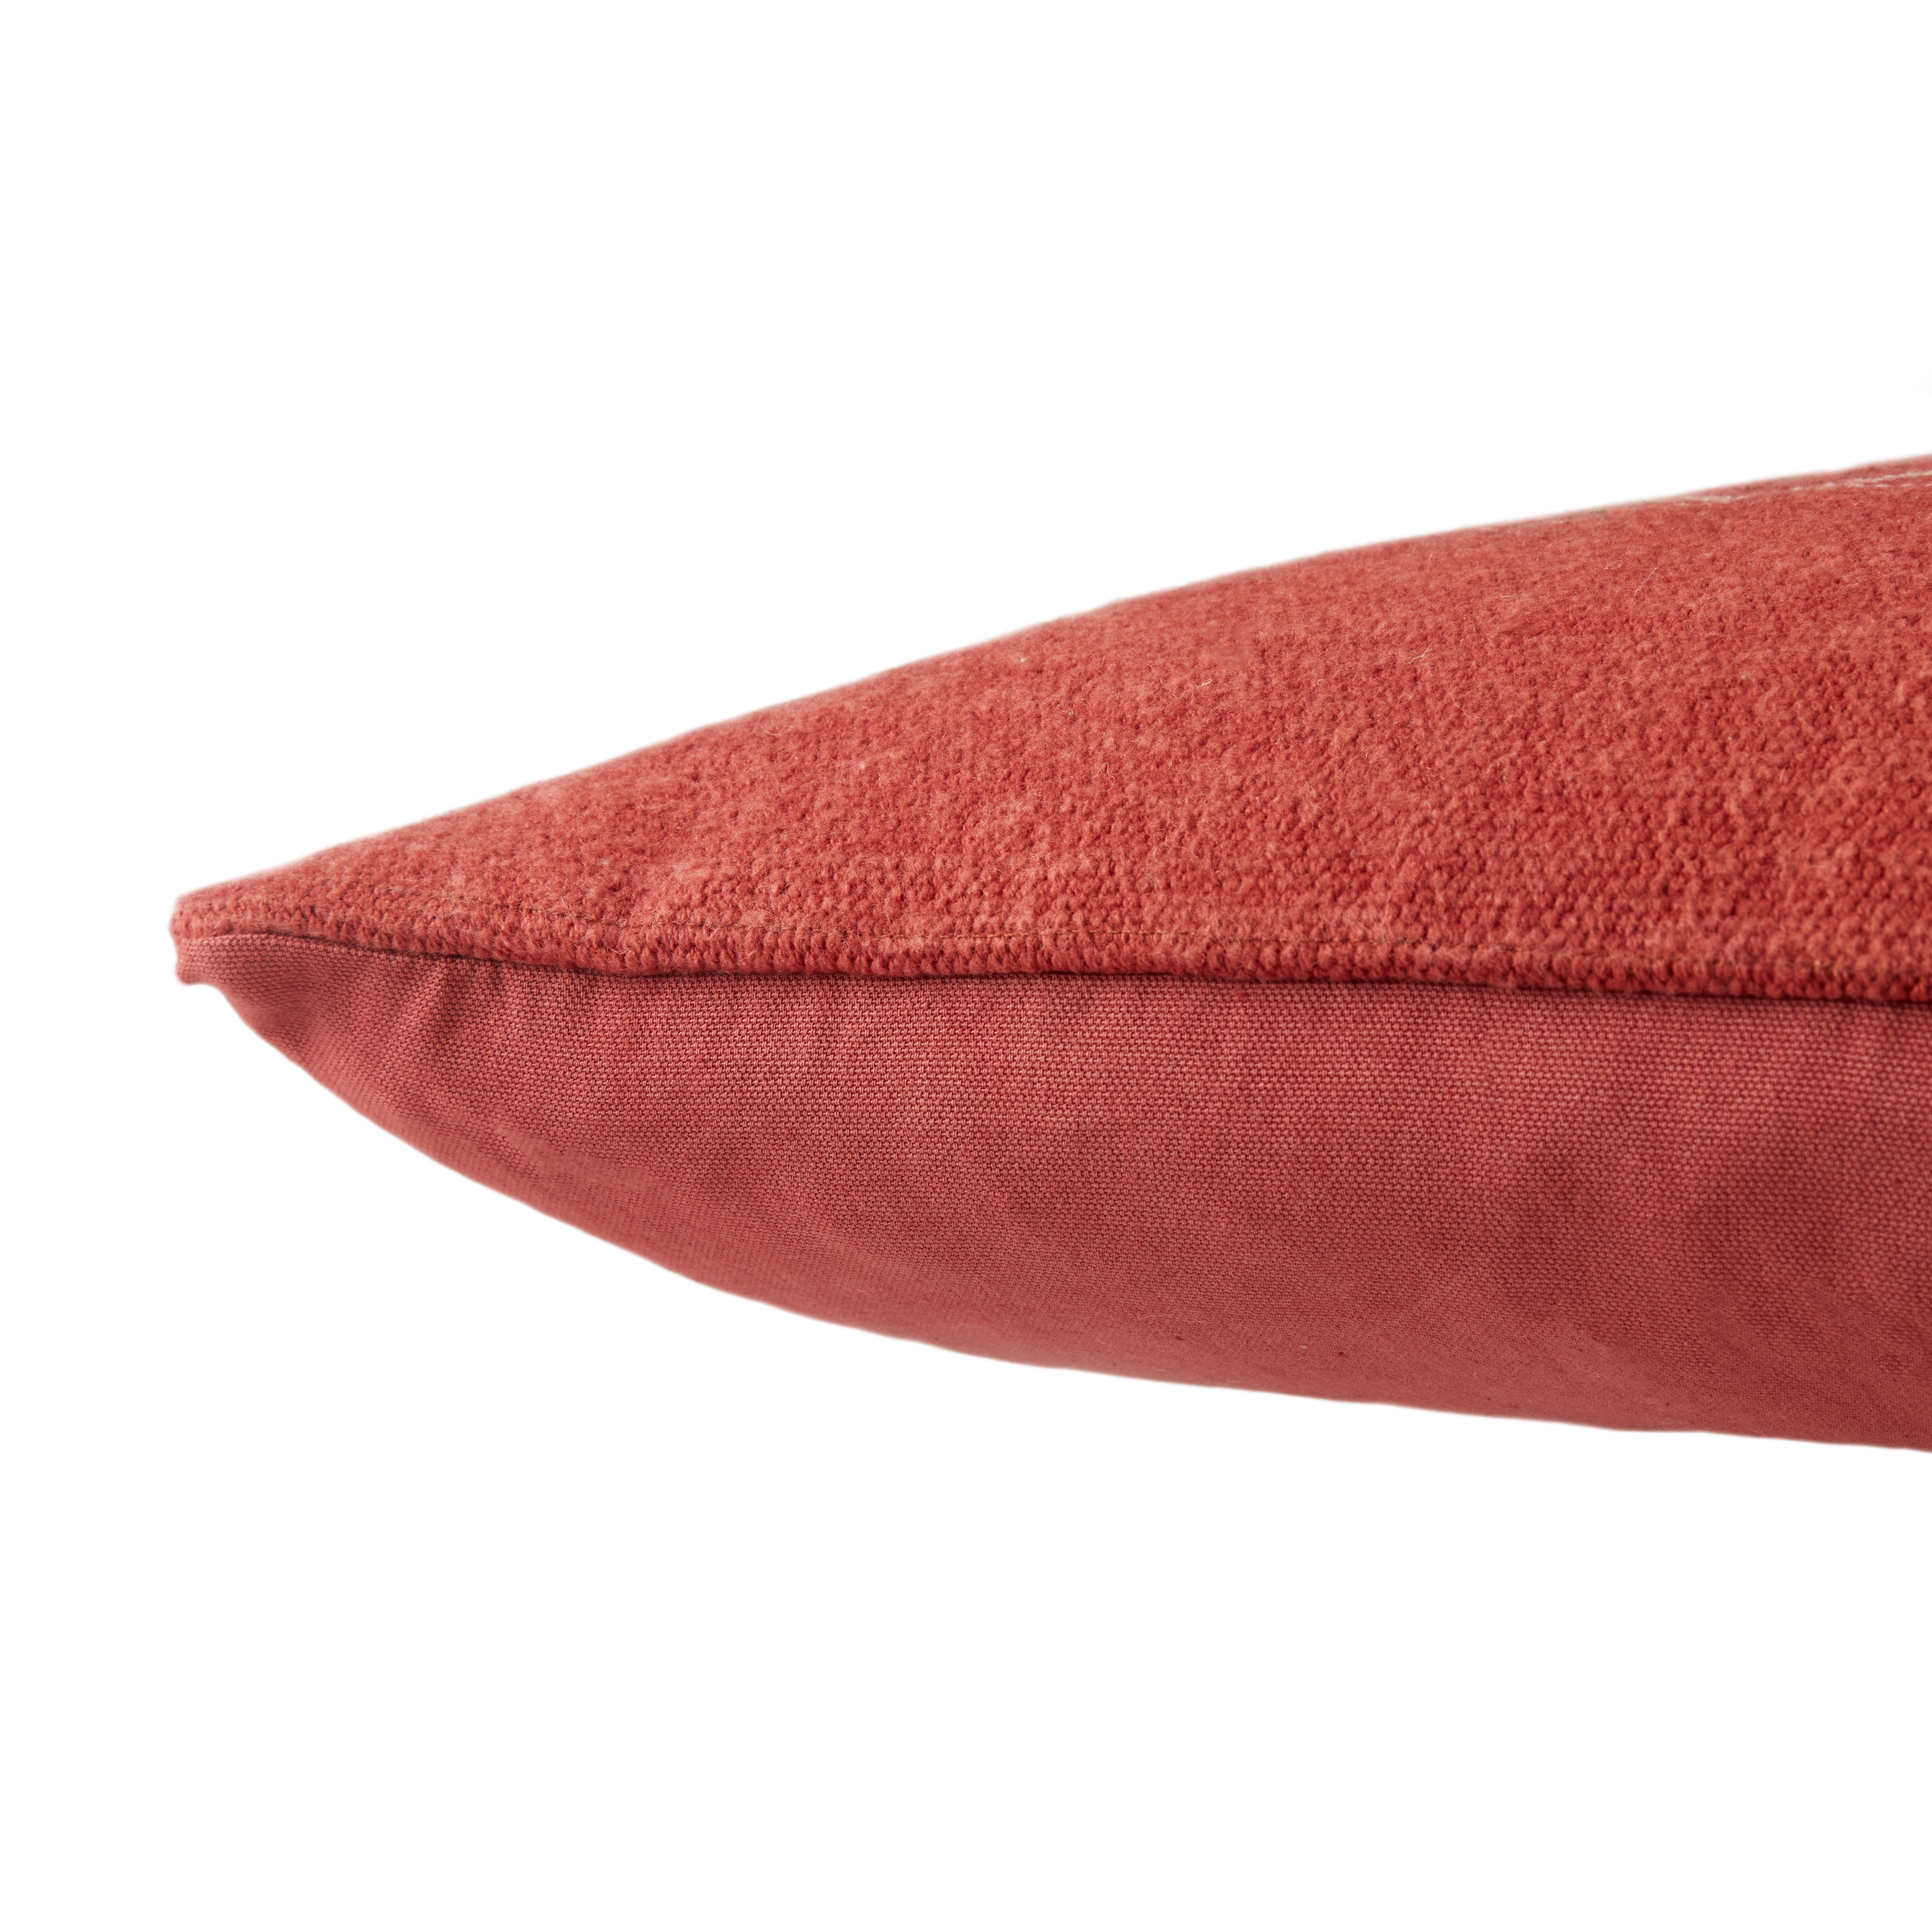 Design (US) Red 24"X24" Pillow - Image 2